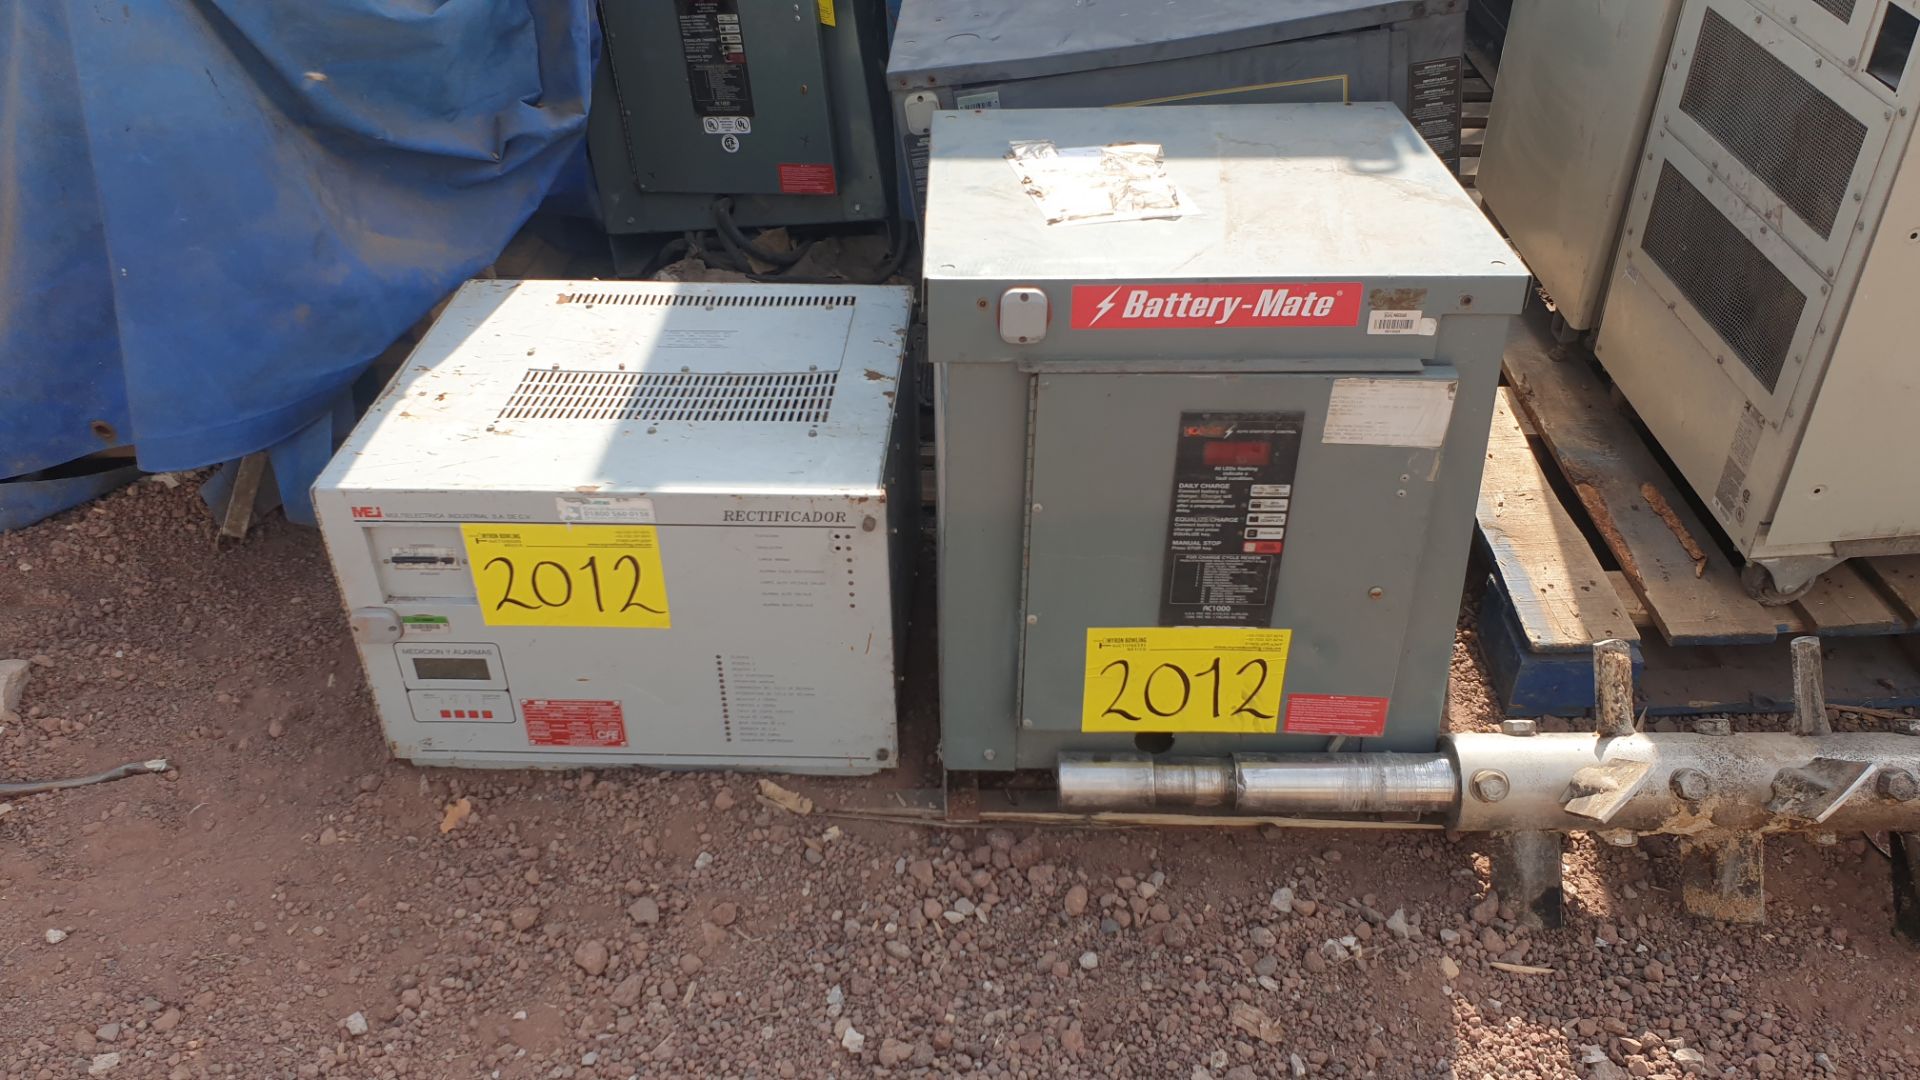 1 MEI Rectifier charger model KFT50130 N/S B14120459 220-440V year 2014 - Image 4 of 11